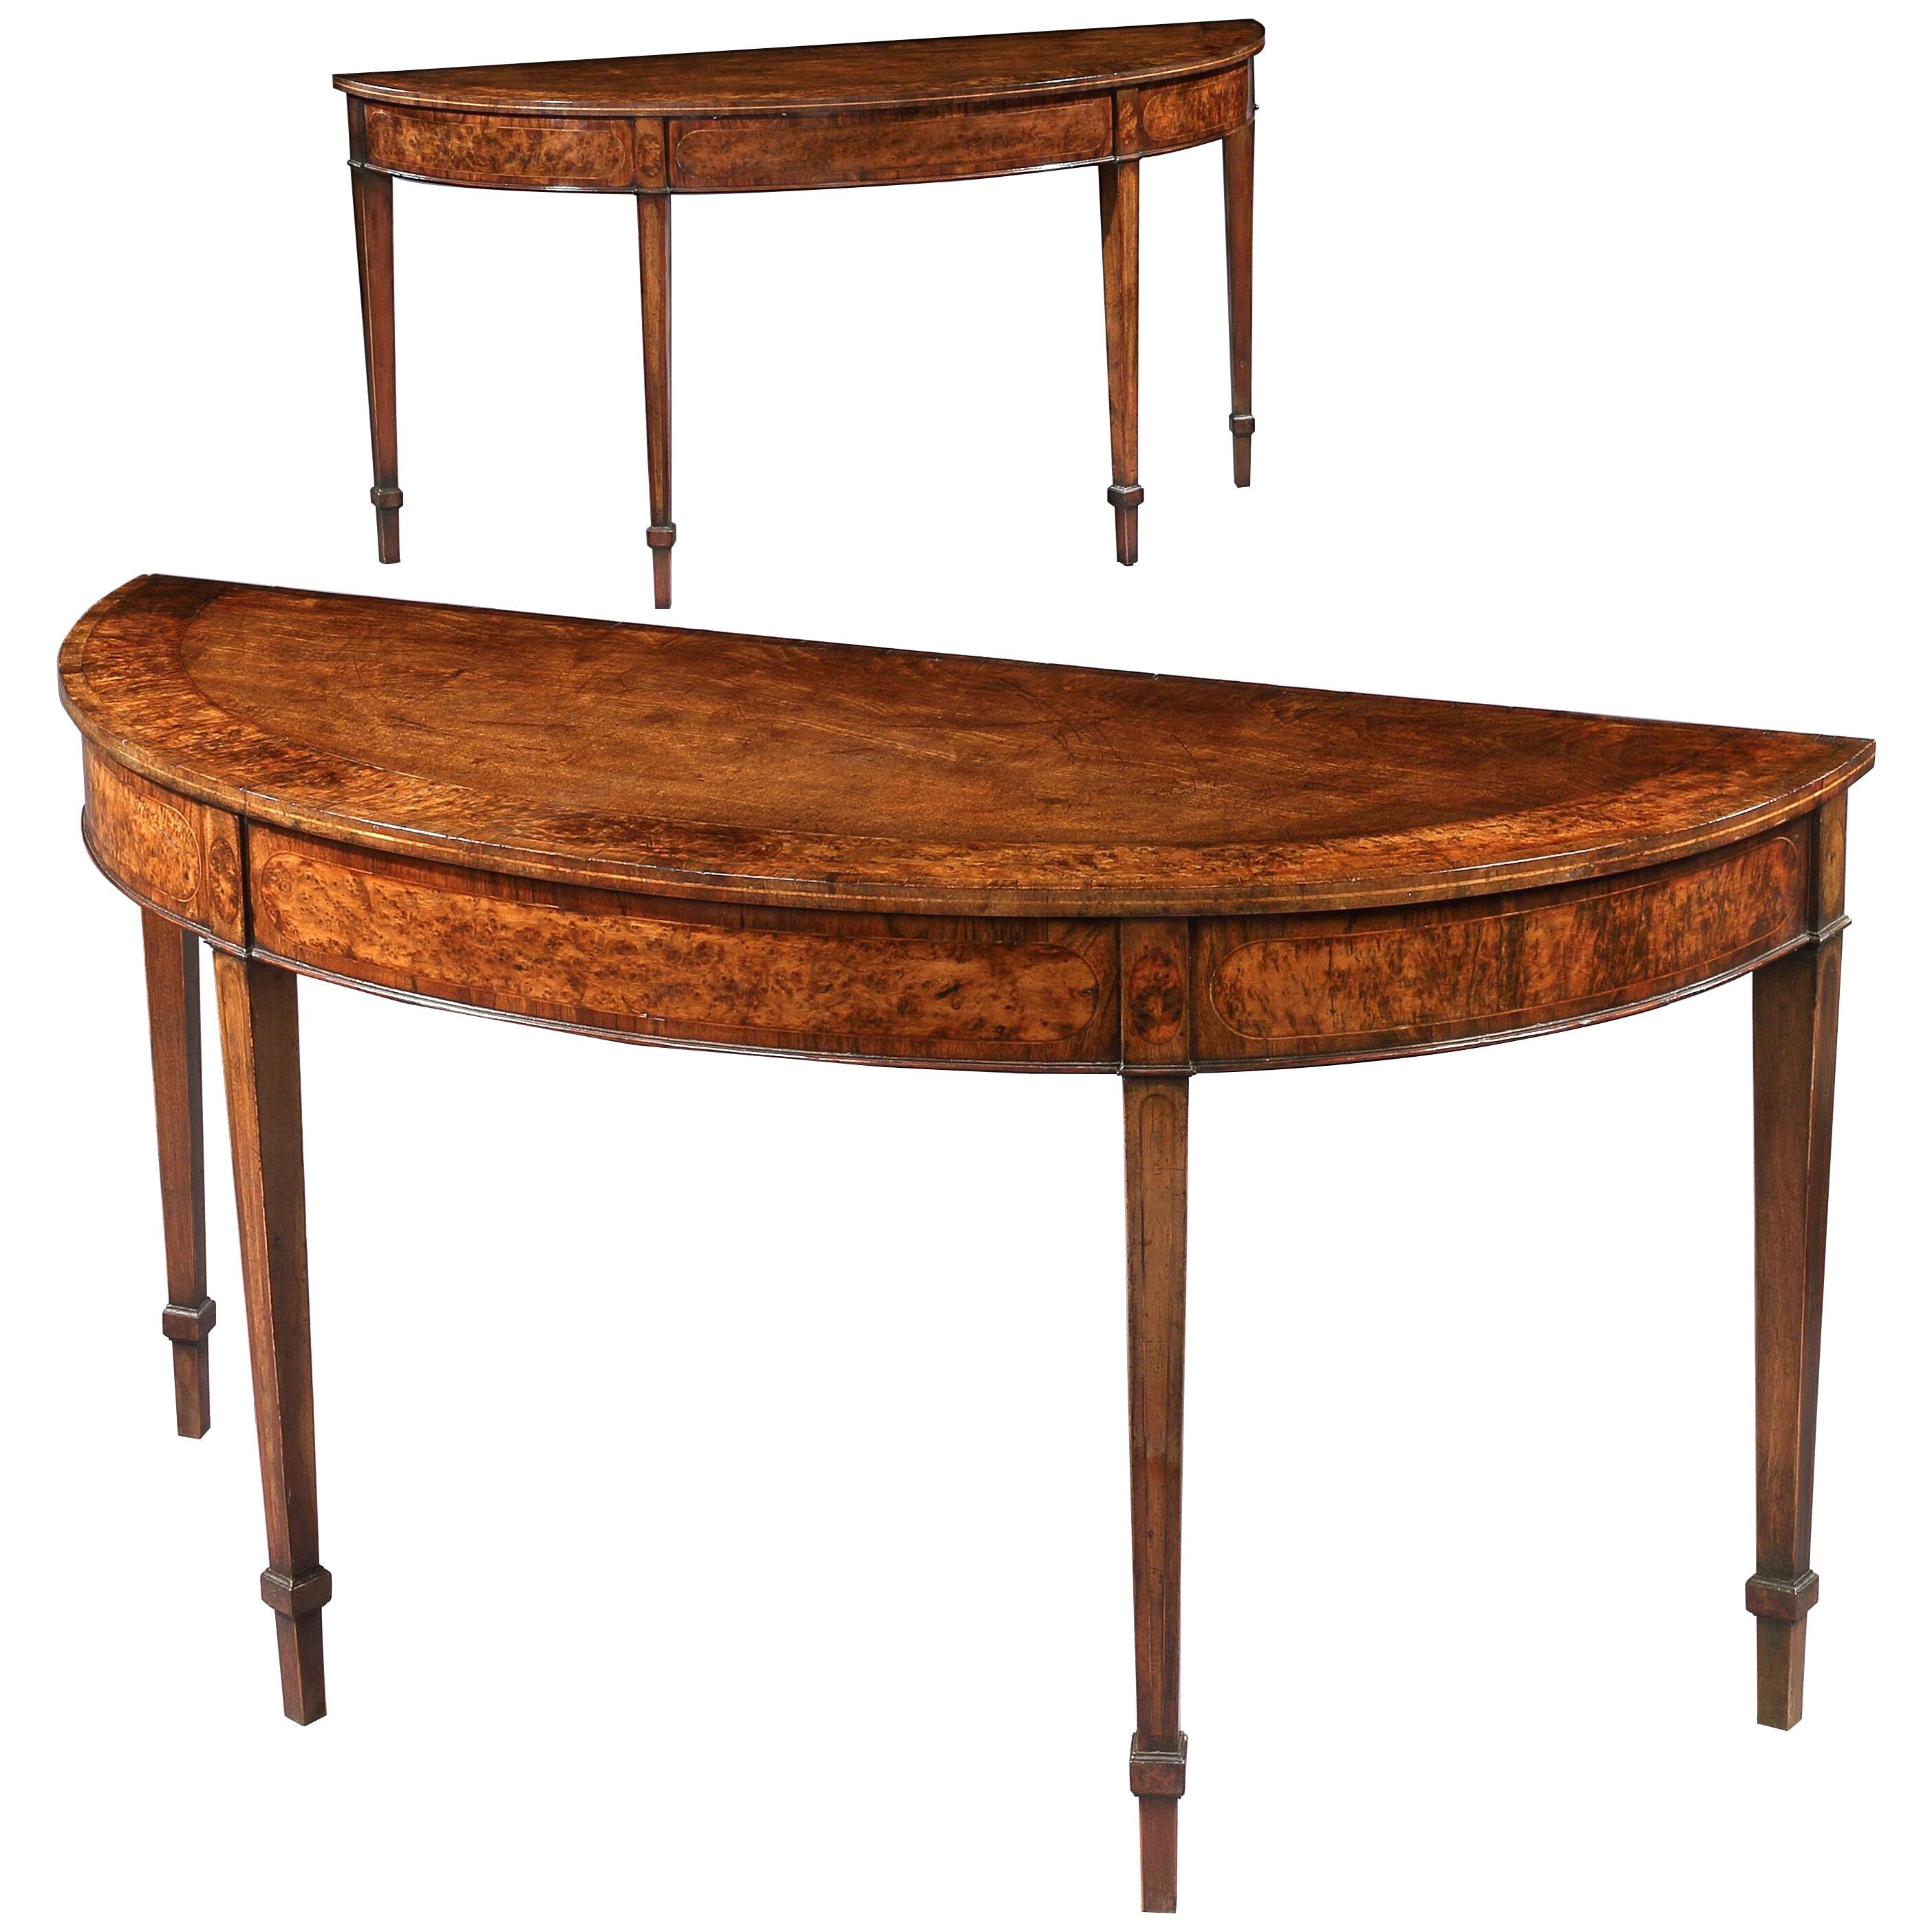 A Pair of George III Period Mahogany and Burr Yew Wood Semi Elliptical Tables